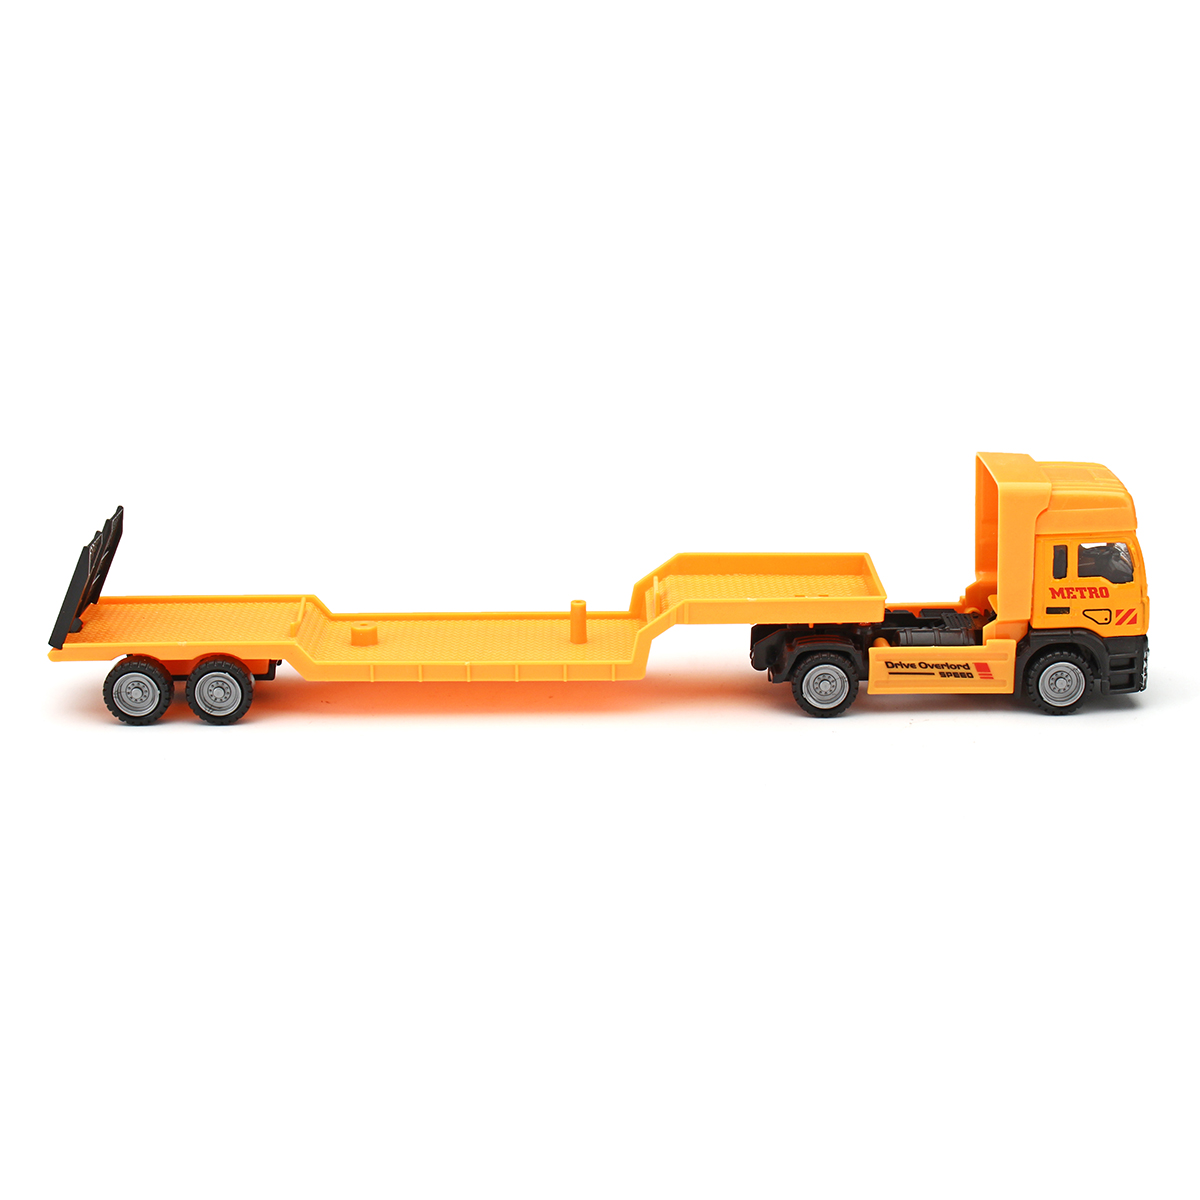 4in1-Kids-Toy-Recovery-Vehicle-Tow-Truck-Lorry-Low-Loader-Diecast-Model-Toys-Construction-Xmas-1414450-8